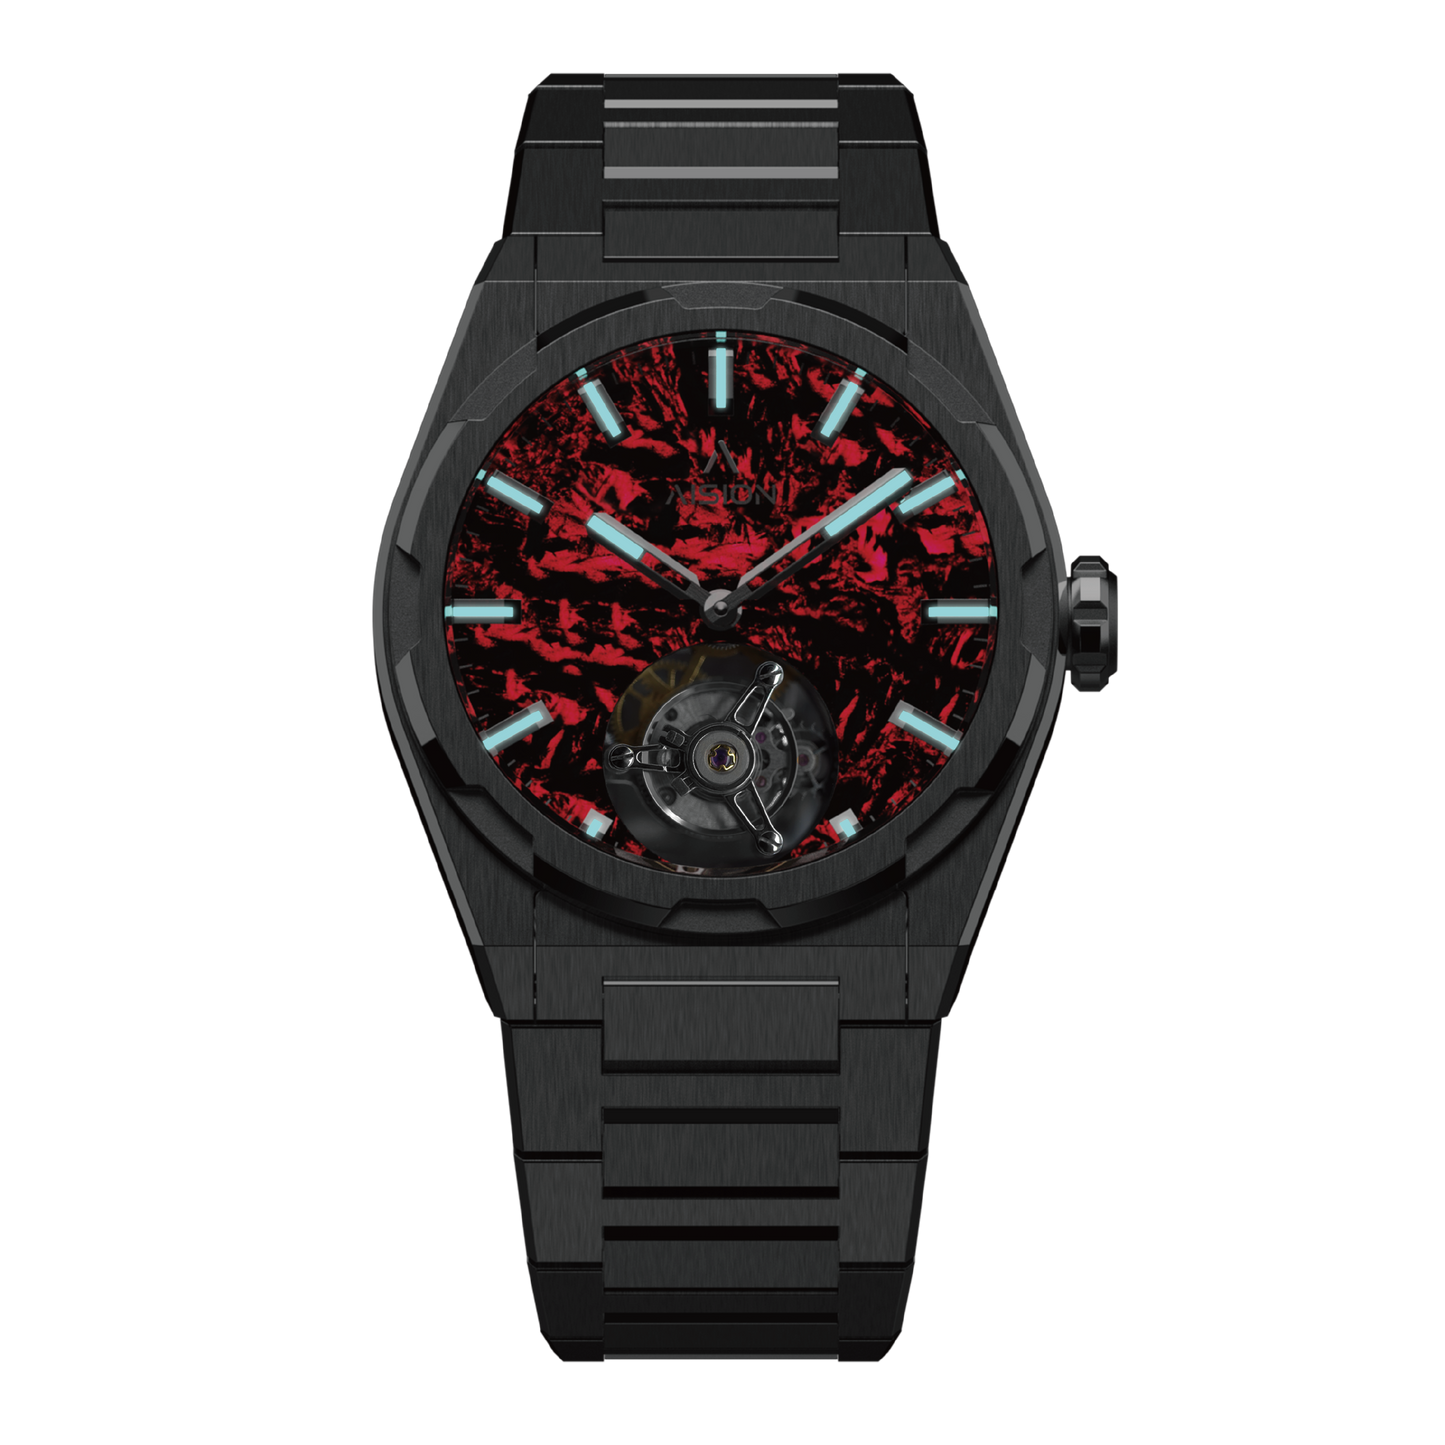 Tourbillon - Lumed Forged Carbon Fiber Dial - Red